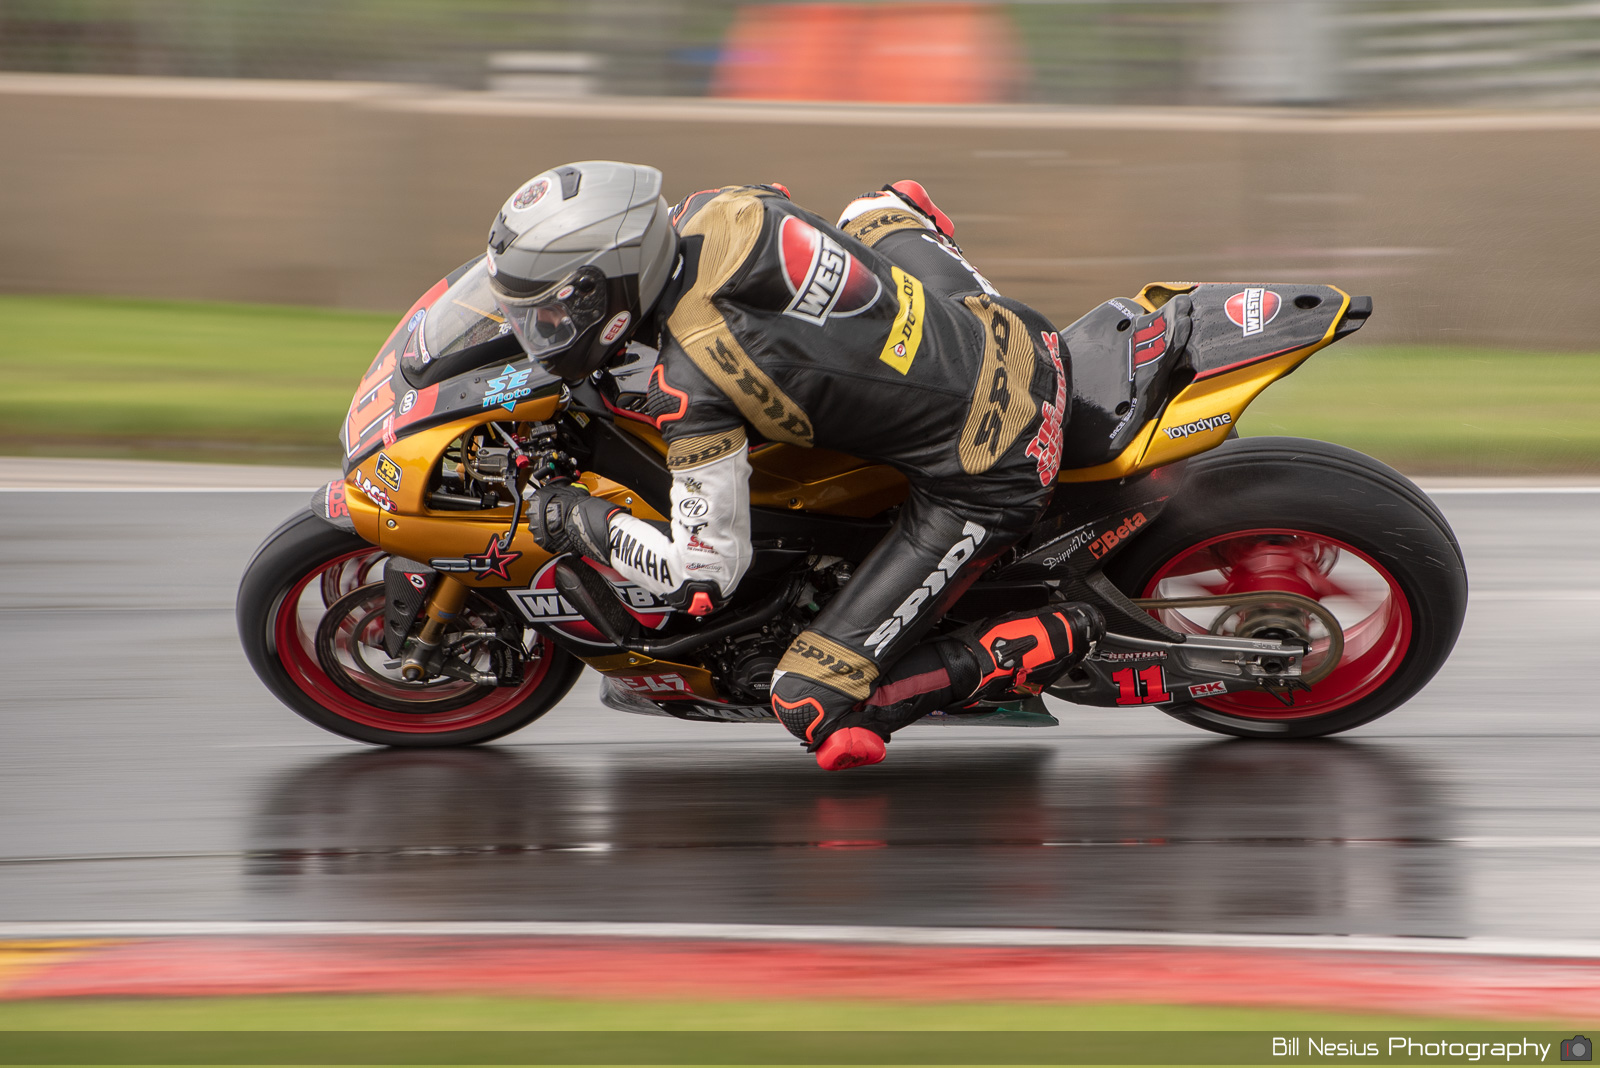 Mathew Scholtz on the Number 11 Westby Racing Yamaha YZF-R1 / DSC_9222 / 3